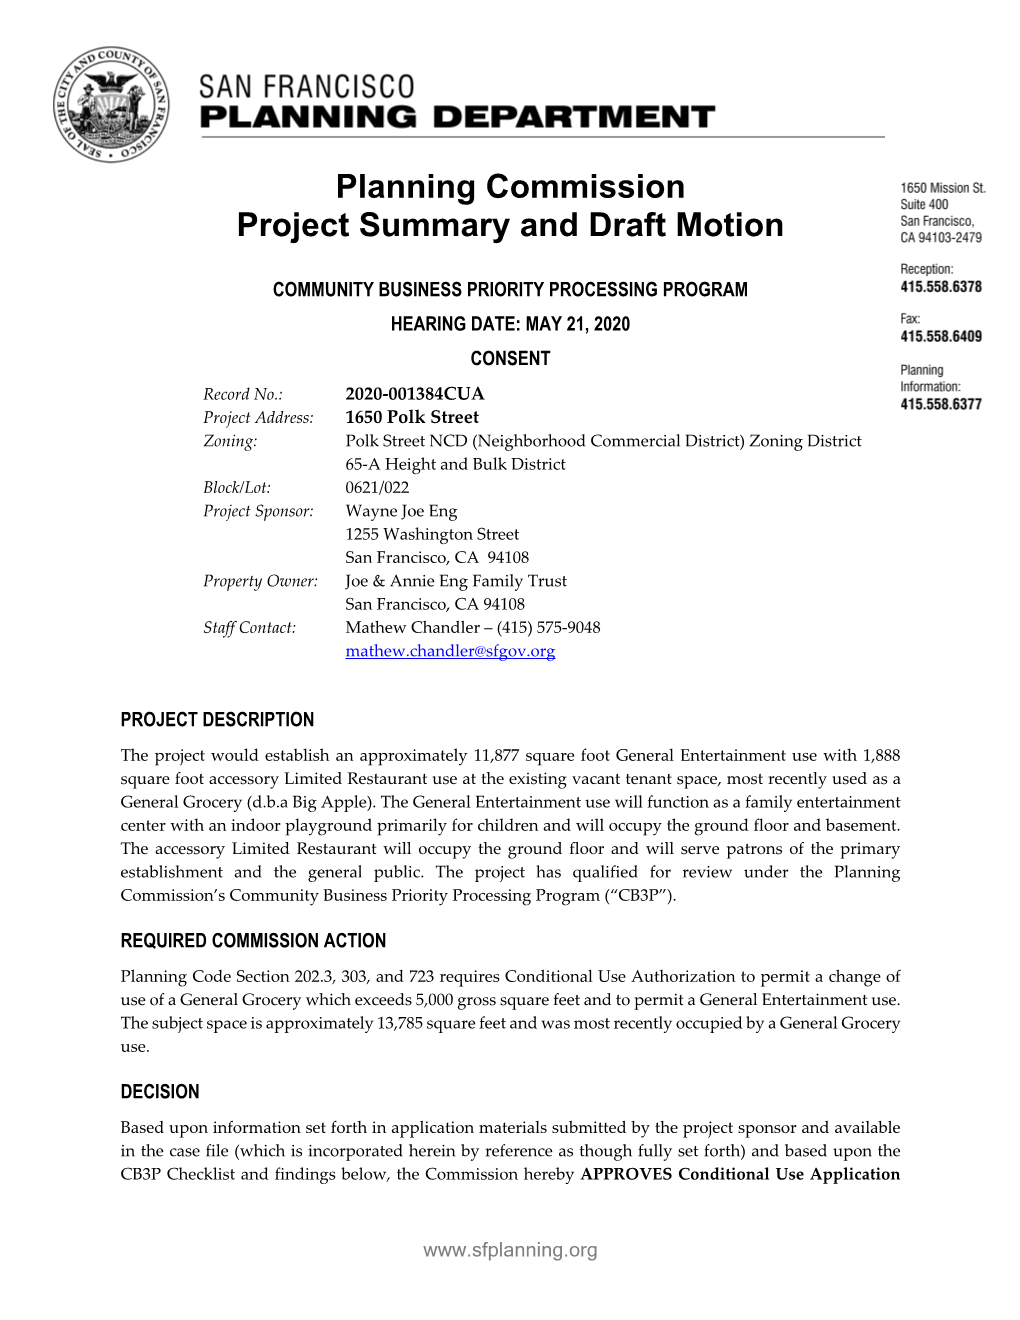 Planning Commission Project Summary and Draft Motion